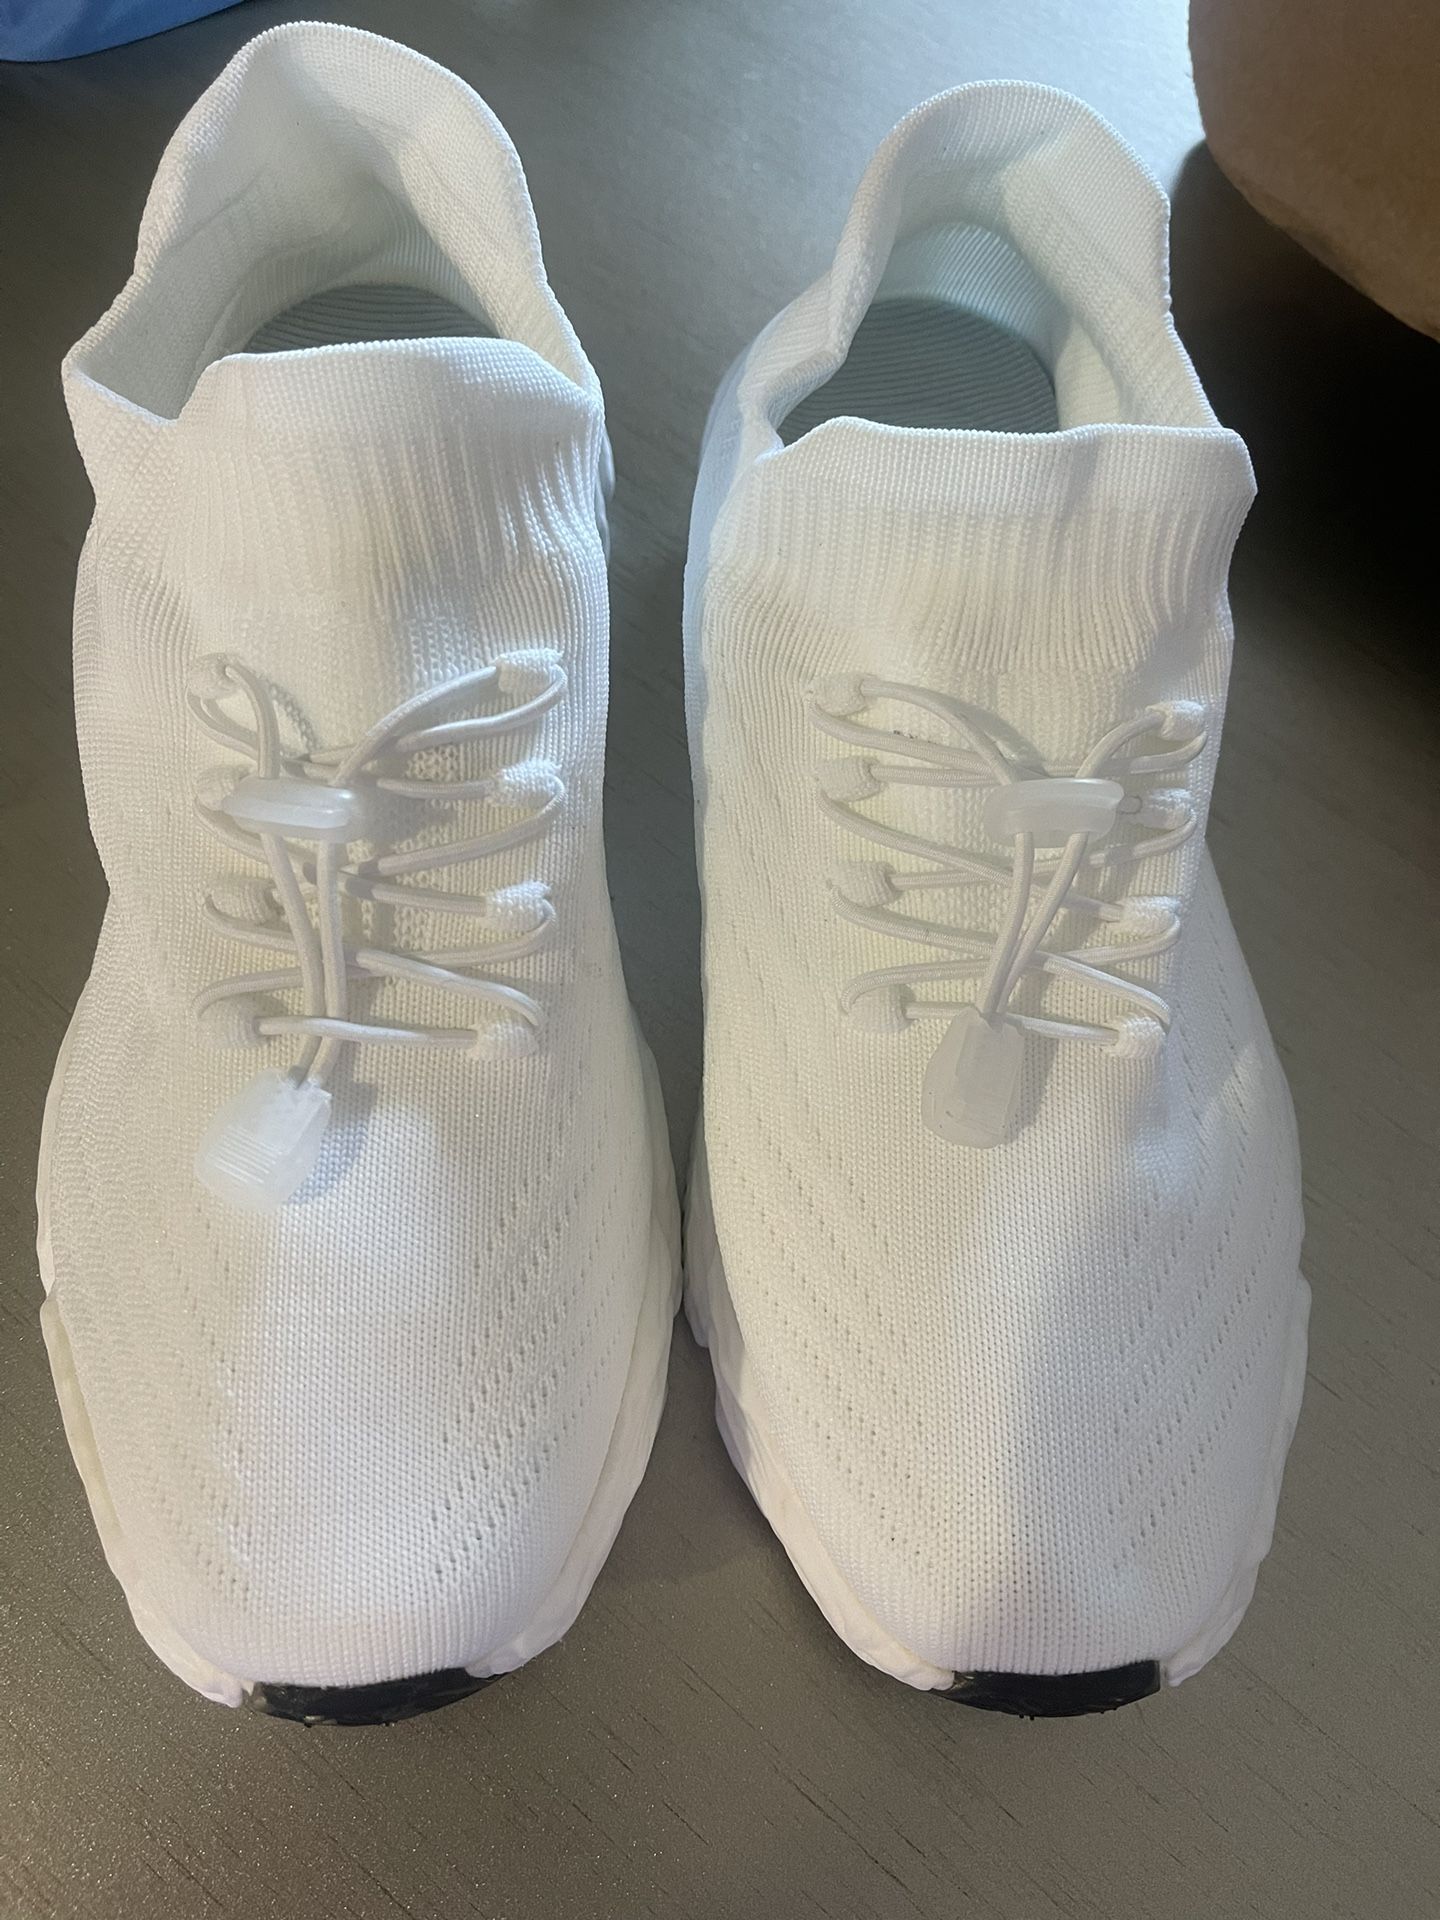 New White Tennis Shoes Size 9 1/2 Asking $20!!!